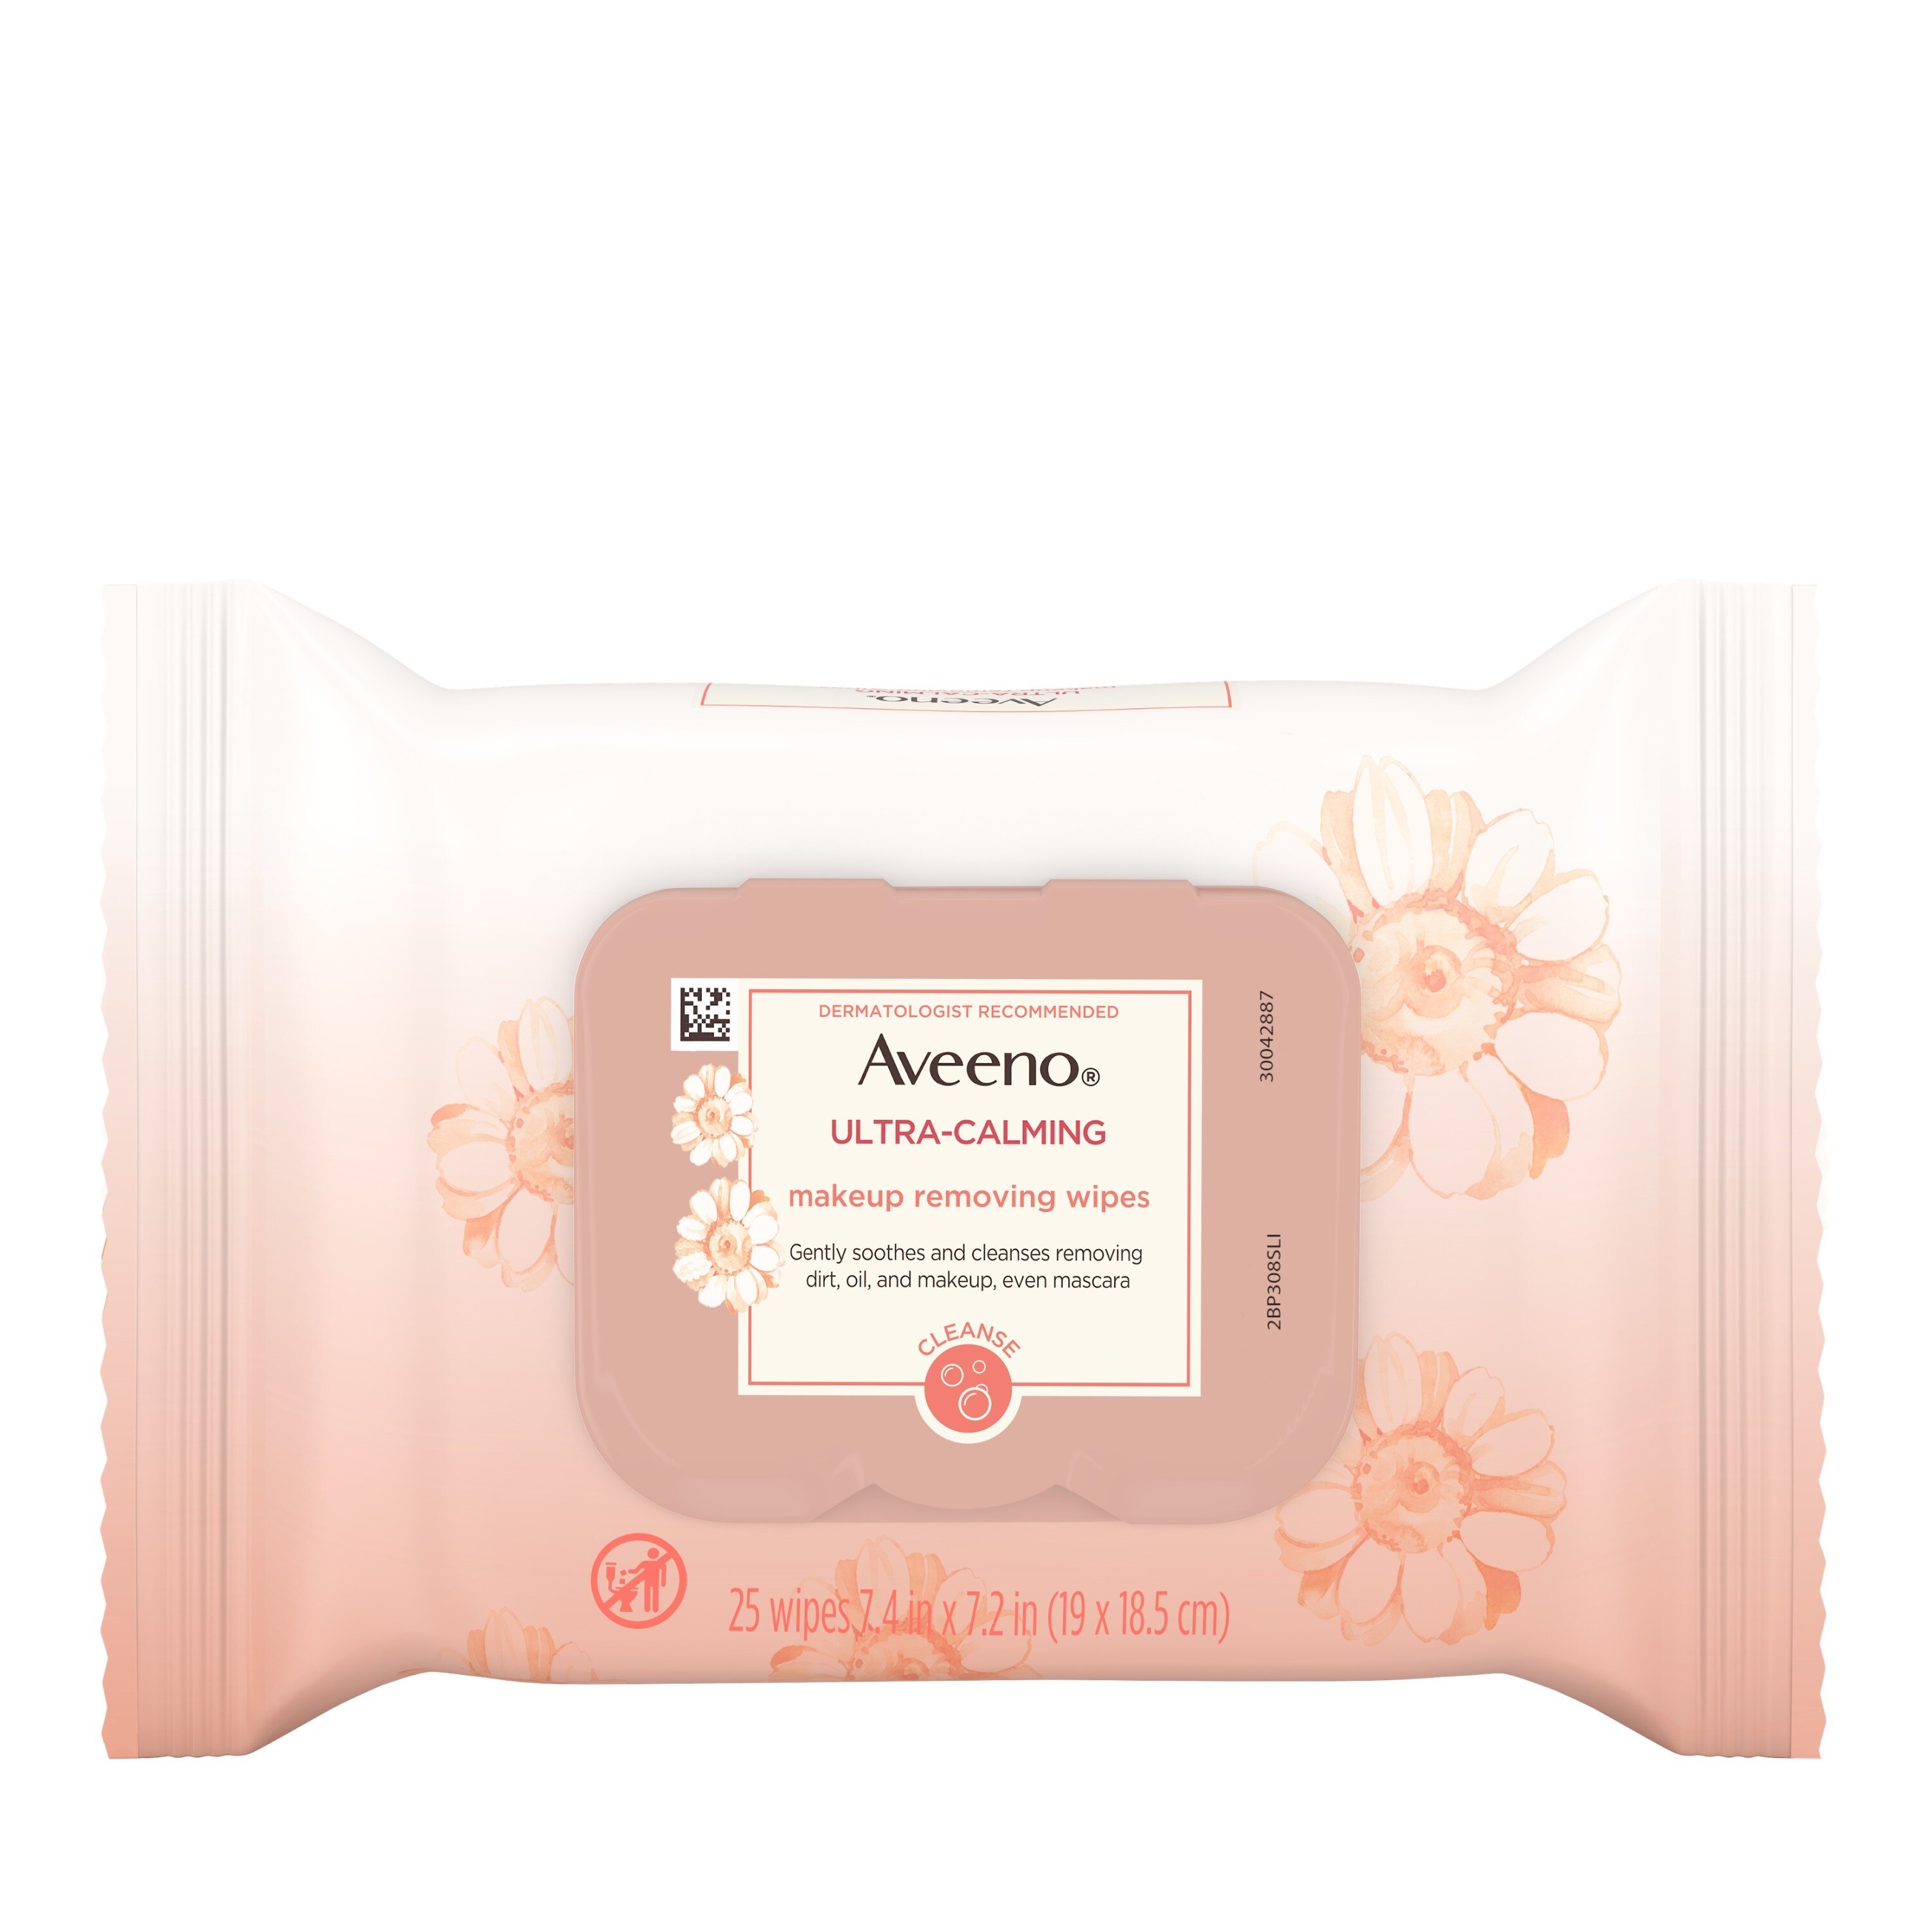 Aveeno Ultra-Calming Makeup Removing Wipes, 25/Pack